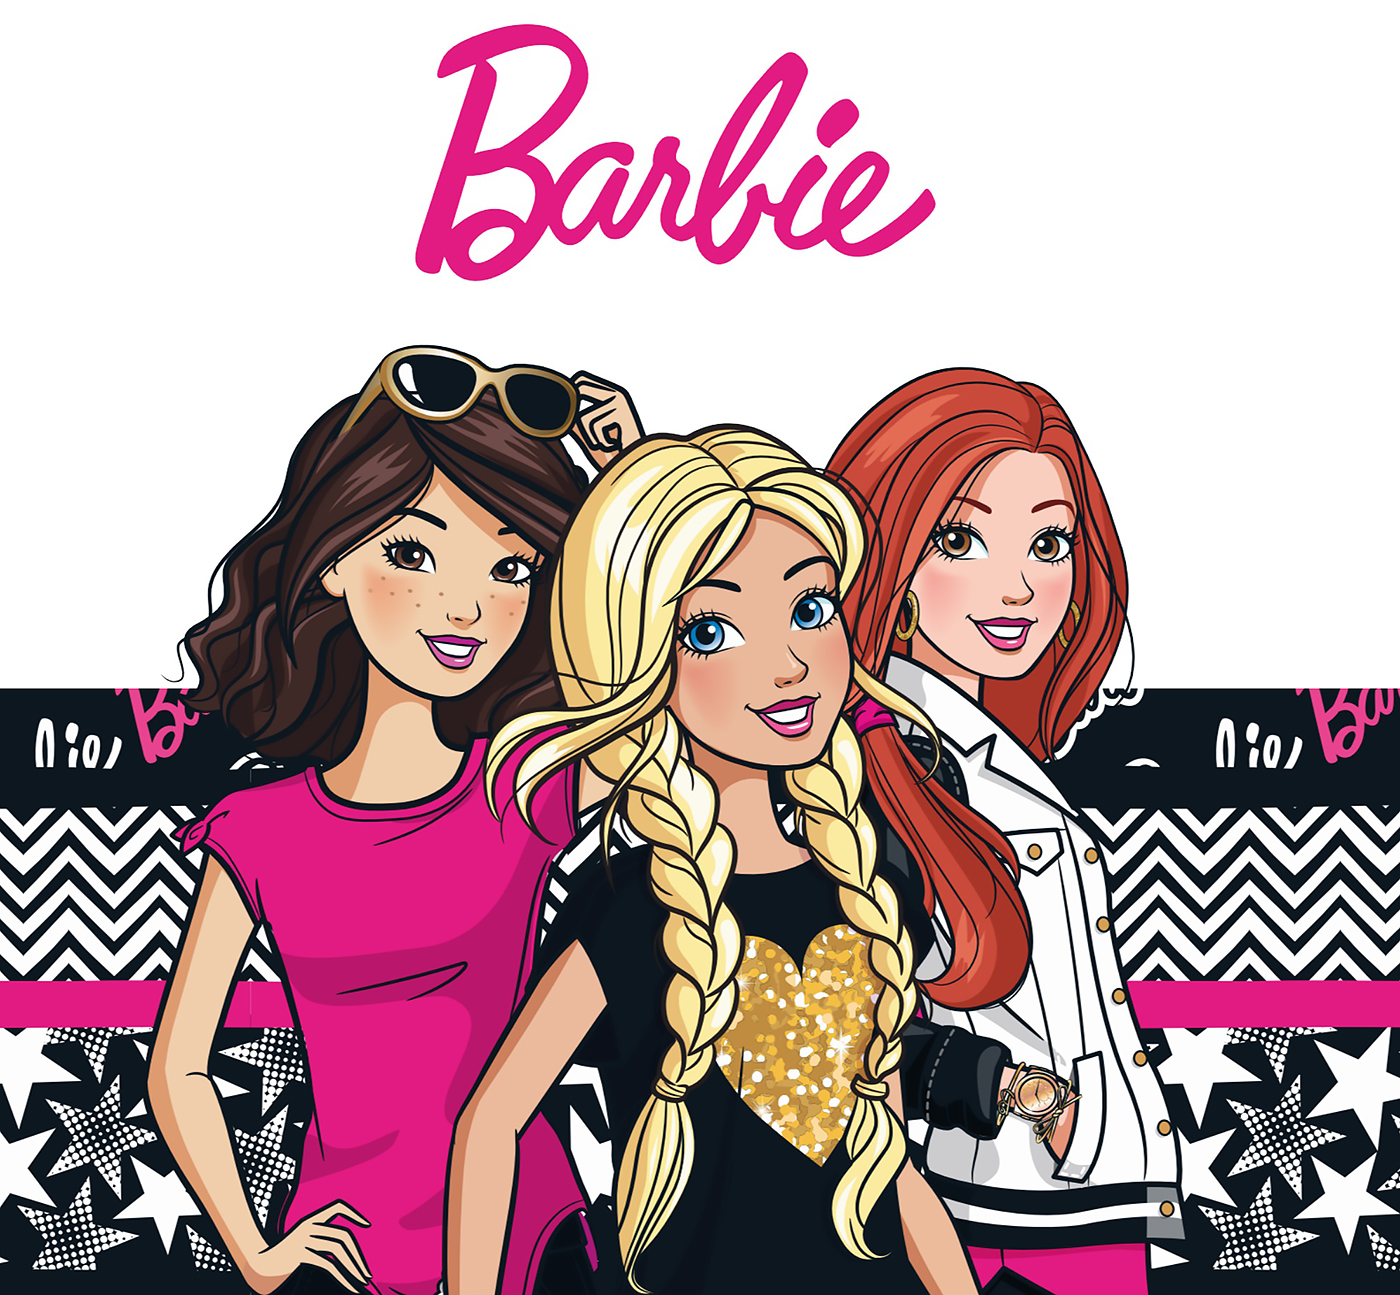 Big, Cool and new official Barbie art - YouLoveIt.com